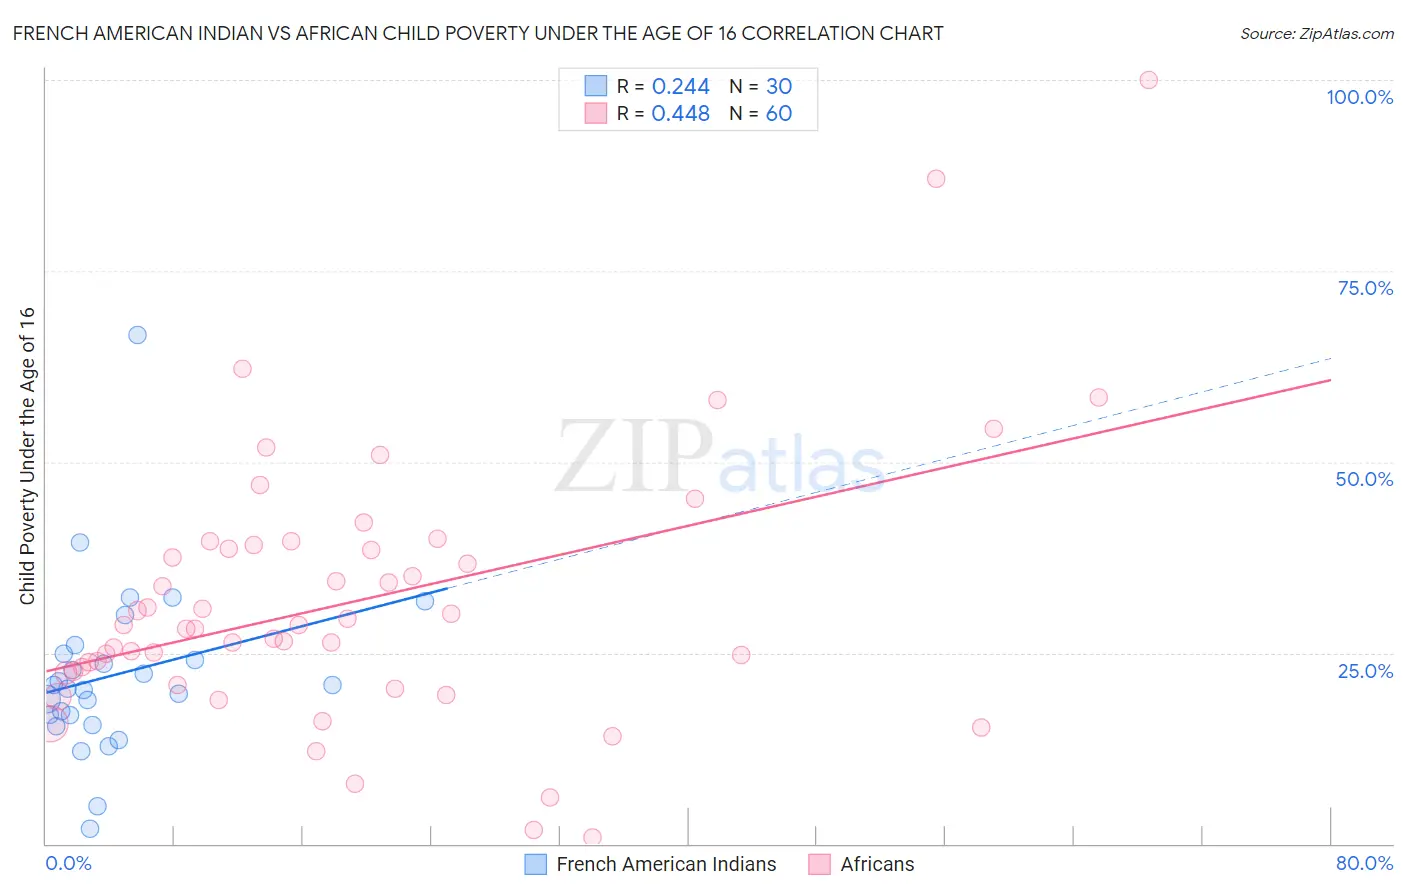 French American Indian vs African Child Poverty Under the Age of 16